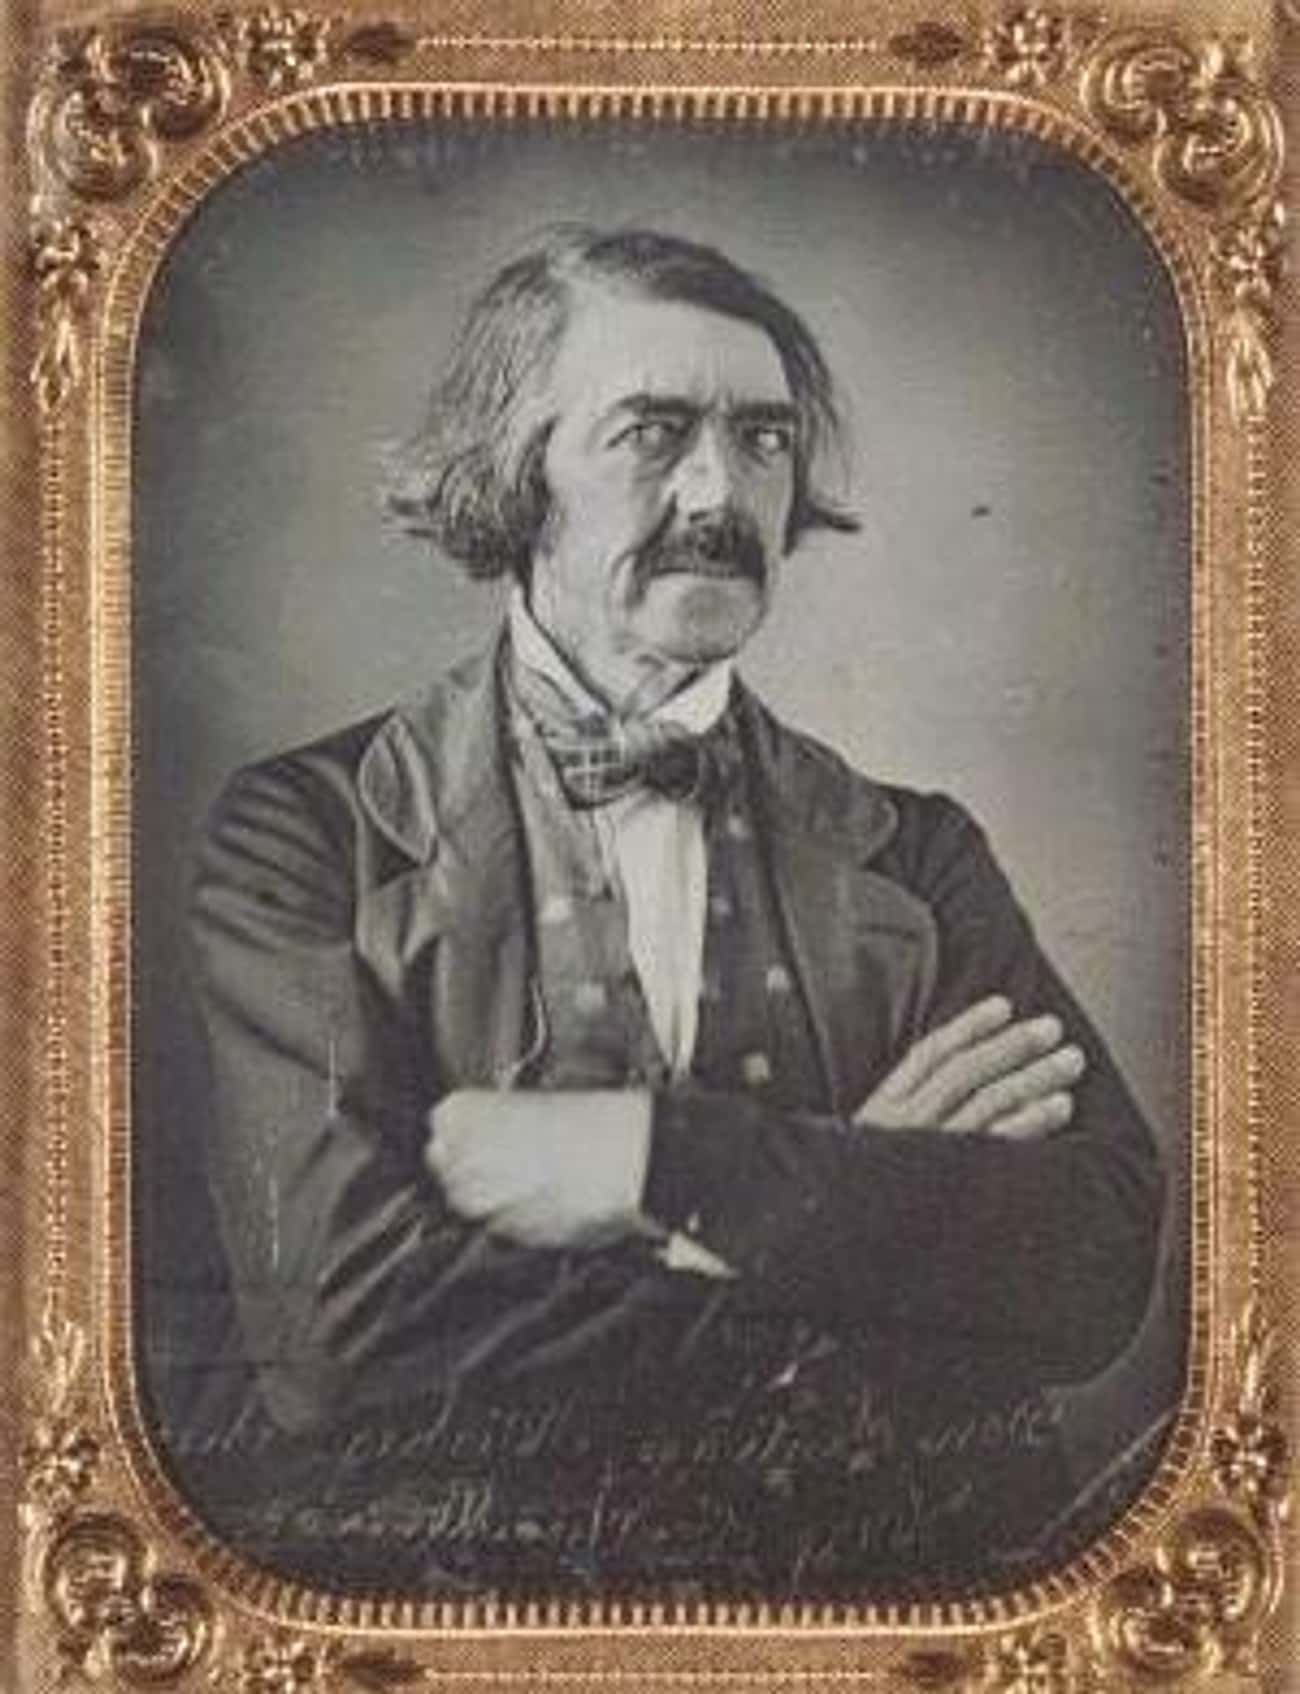 James Kirker Worked With Mexico To Capture And Kill Indian Warriors